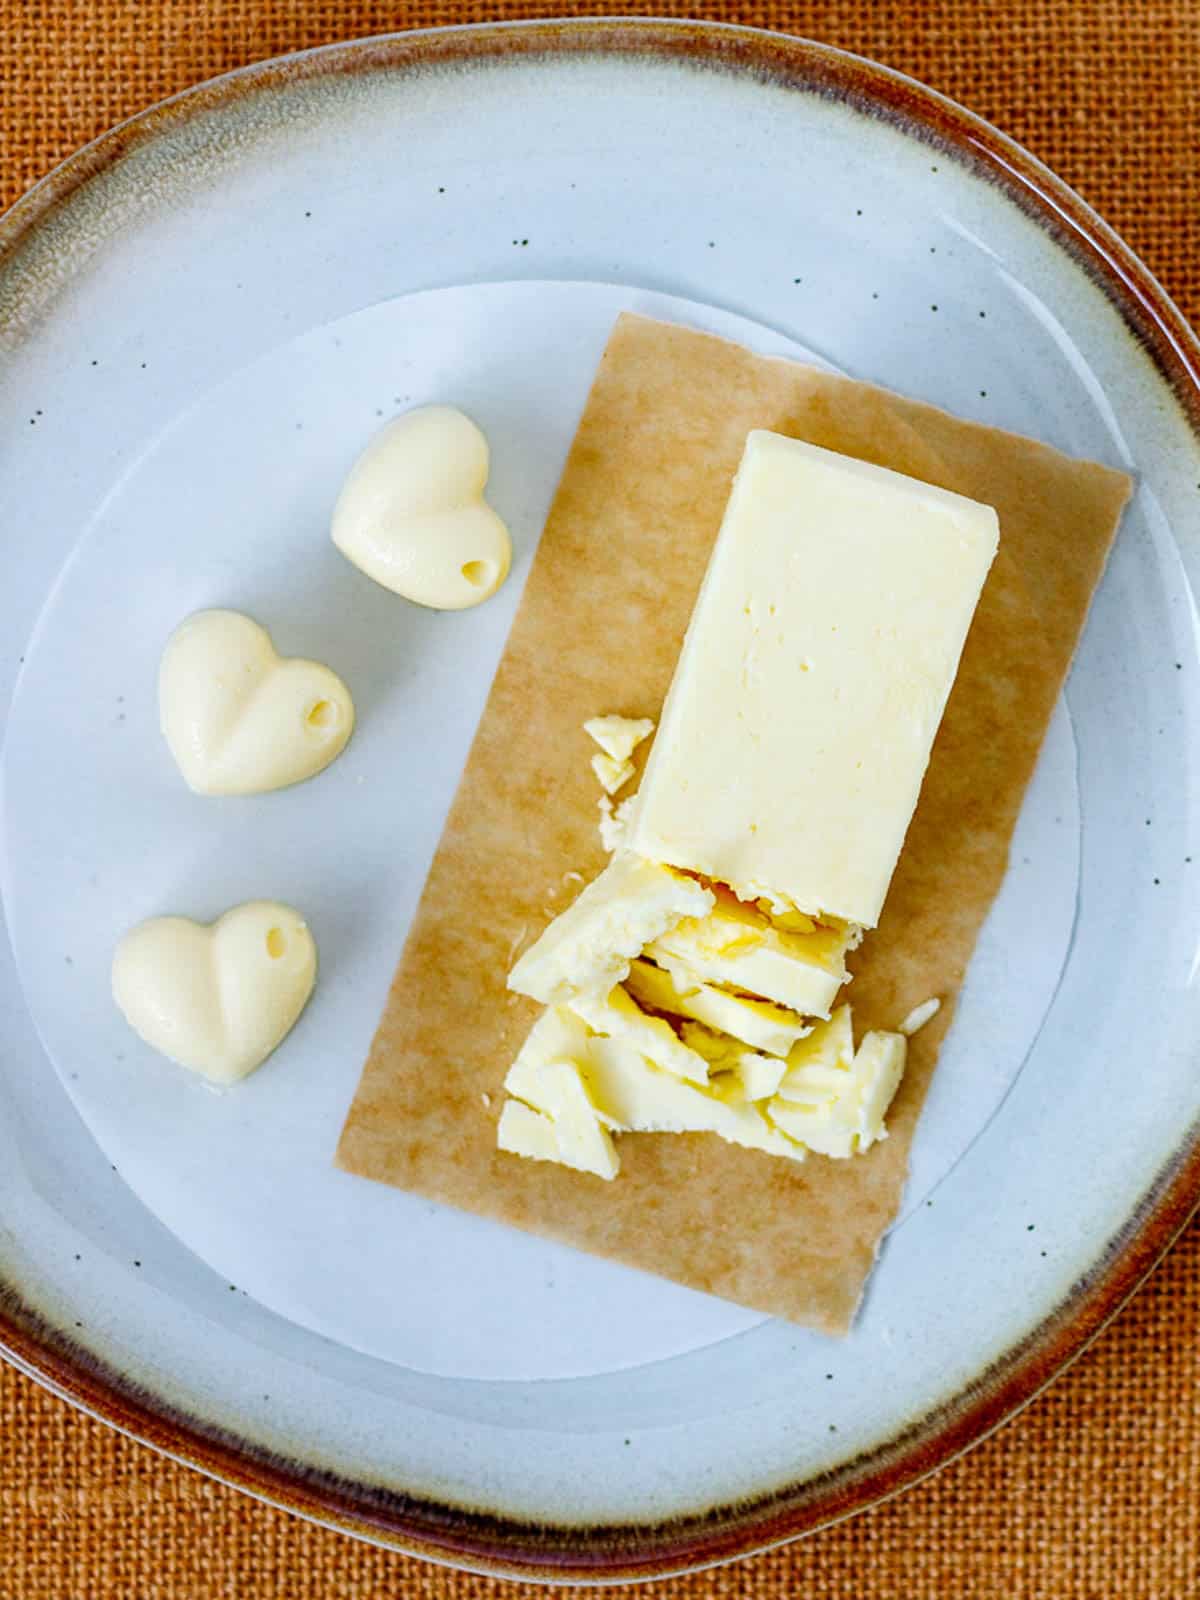 Recipe for vegan butter made without coconut oil.